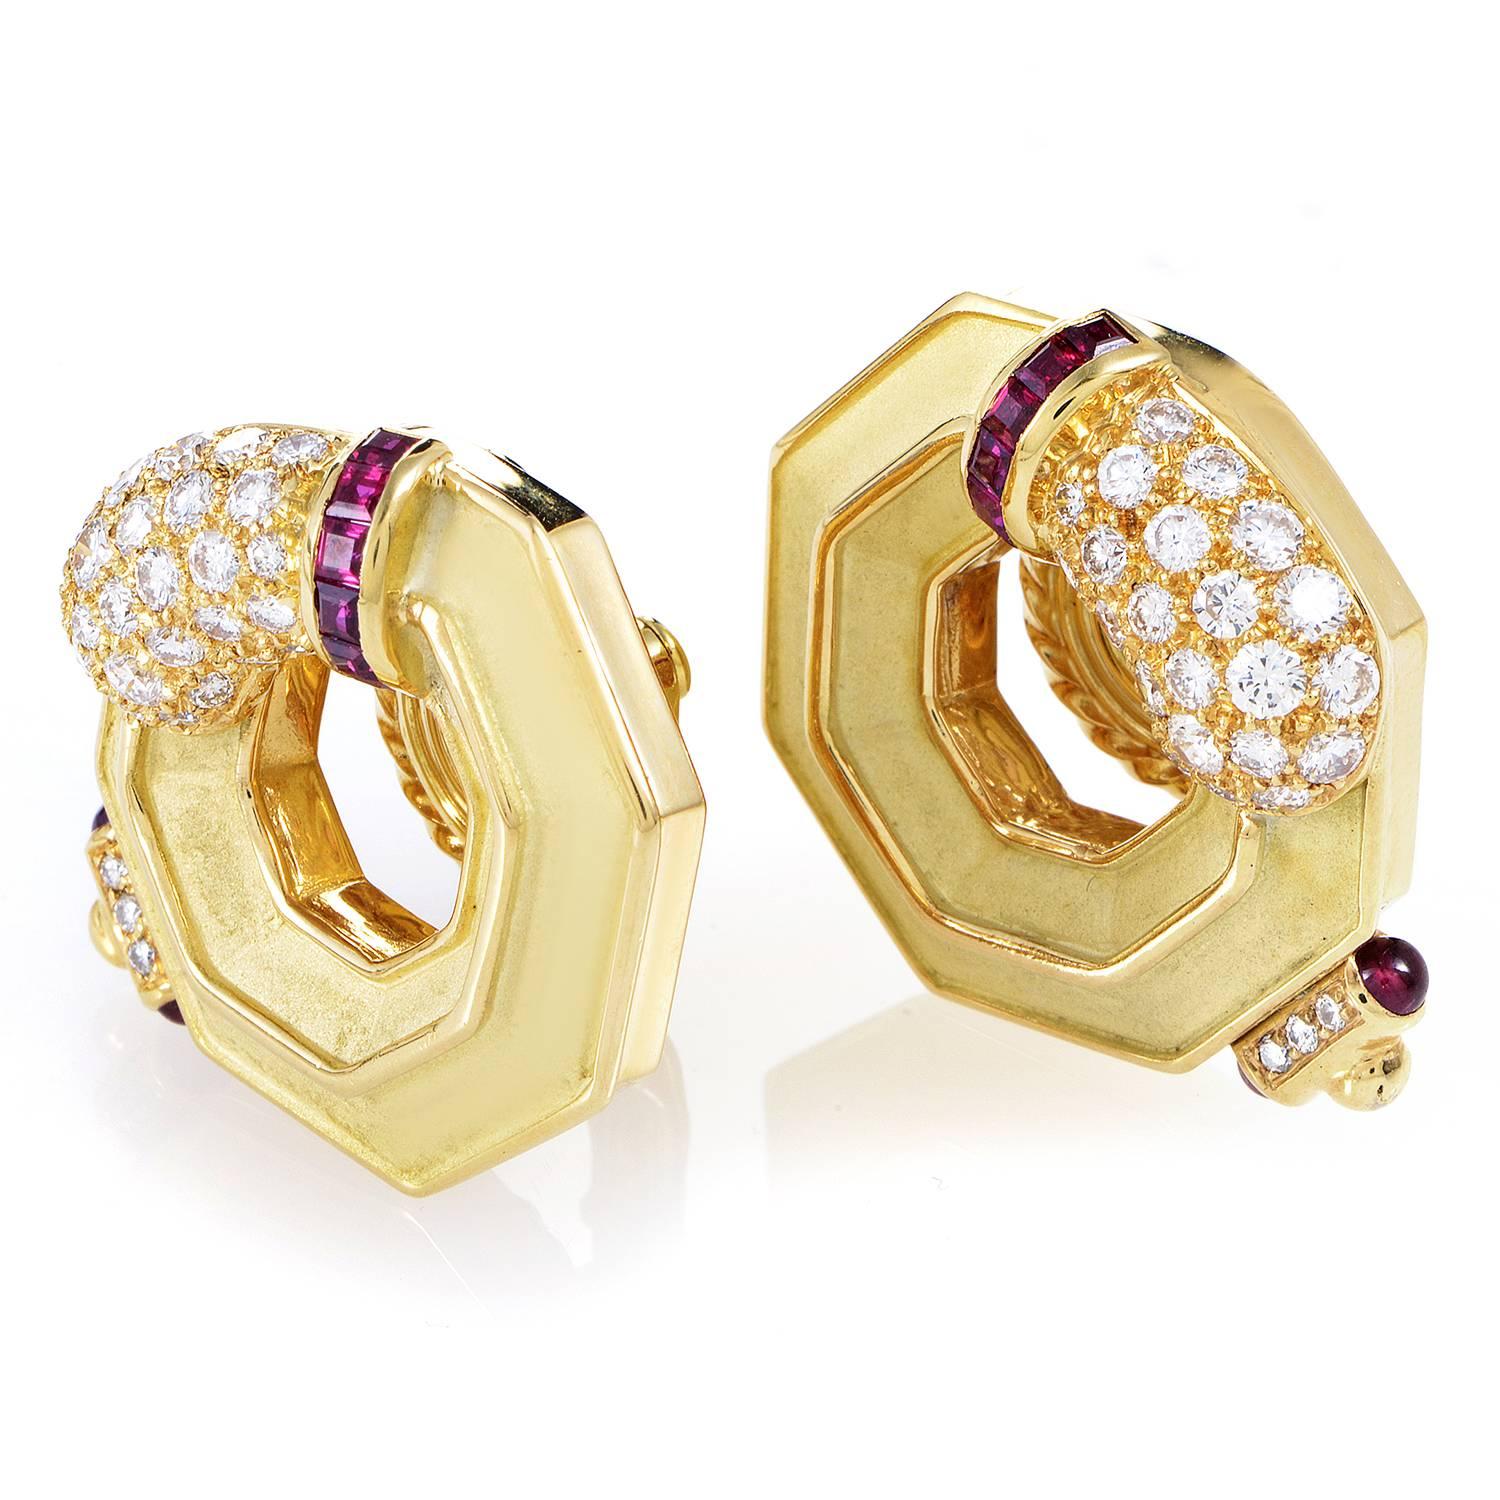 An adorable design which tastefully combines diverse materials and nuances to produce a resolutely feminine overall tone, this exceptional pair of earrings from Chaumet boasts charming 18K yellow gold, lovely rubies totaling 0.40ct and lustrous